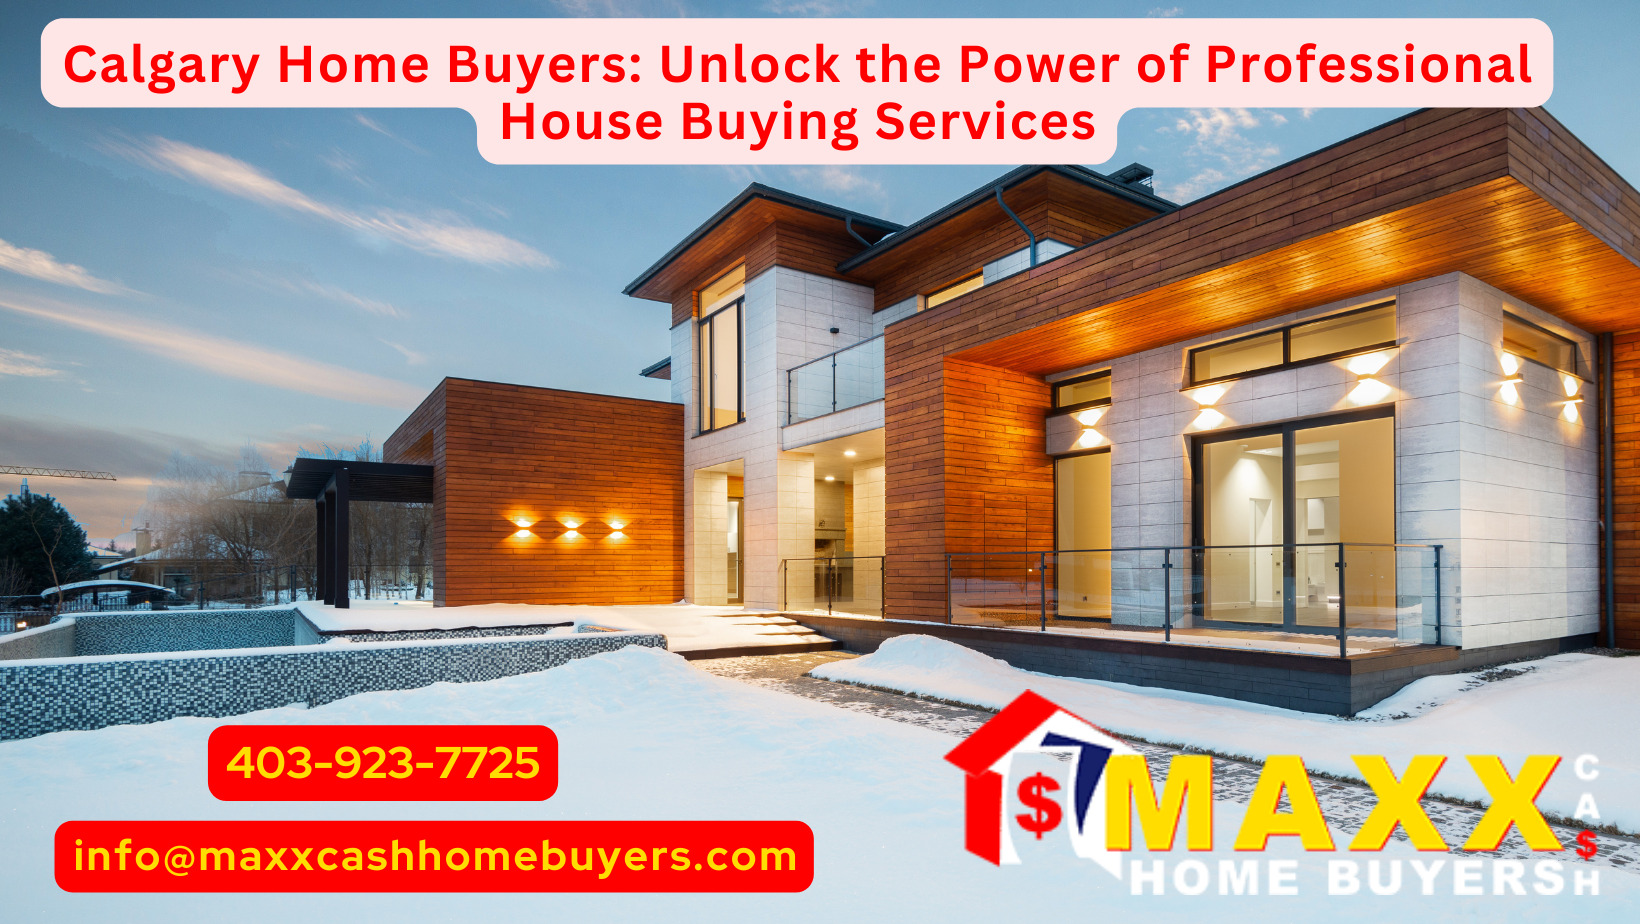 Calgary Home Buyers: Unlock the Power of Professional House Buying Services